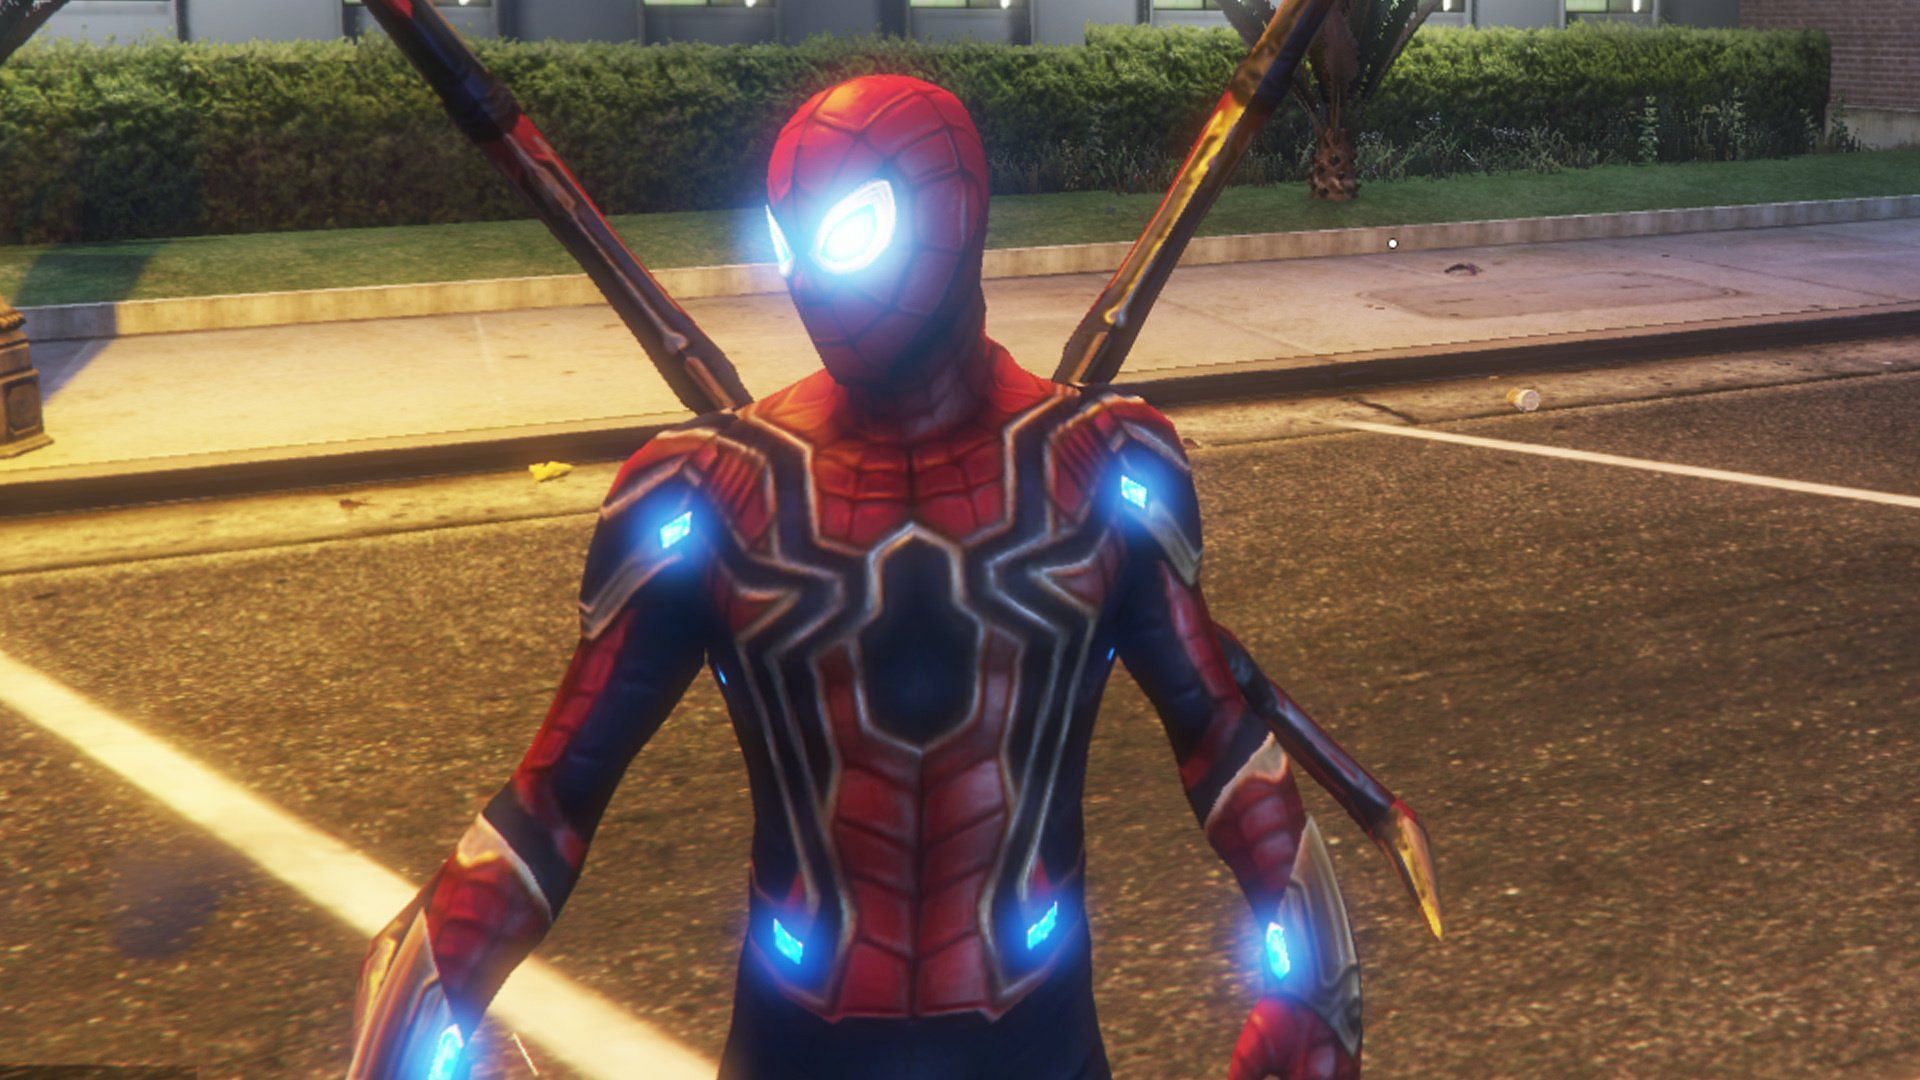 Iron Spider suit from Avengers Infinity War (Image via gta5-mods.com)